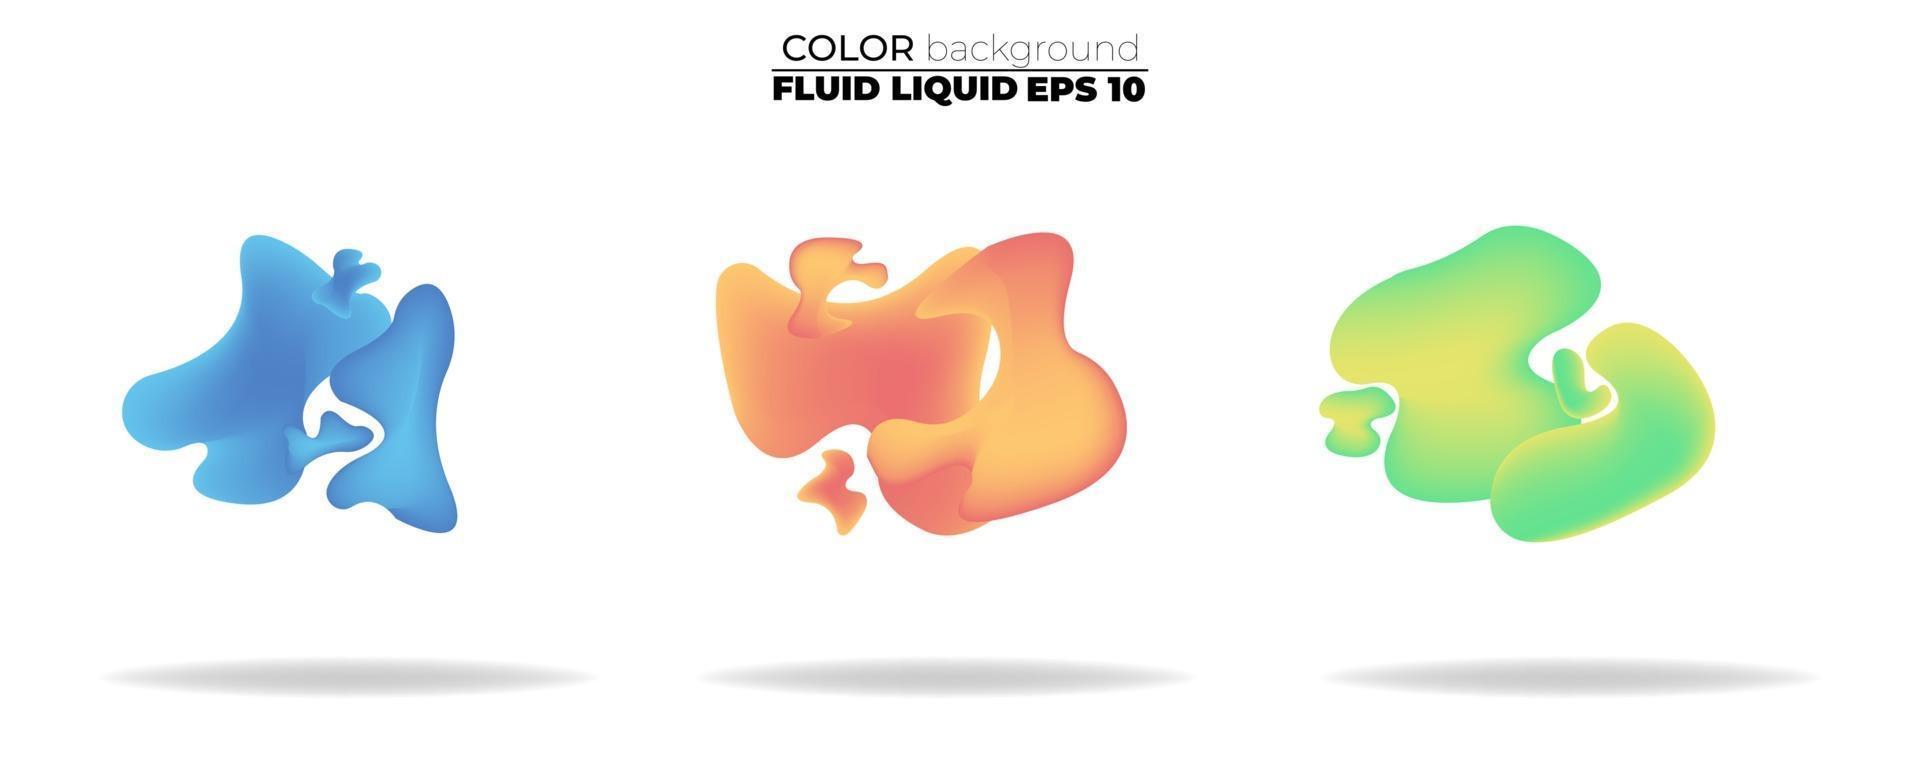 Fluid shape vector set. Gradient liquid with neon colors, item for the design of a logo, flyer, presentation, gift card, poster on wall, landing page, cover book, banner, social media post